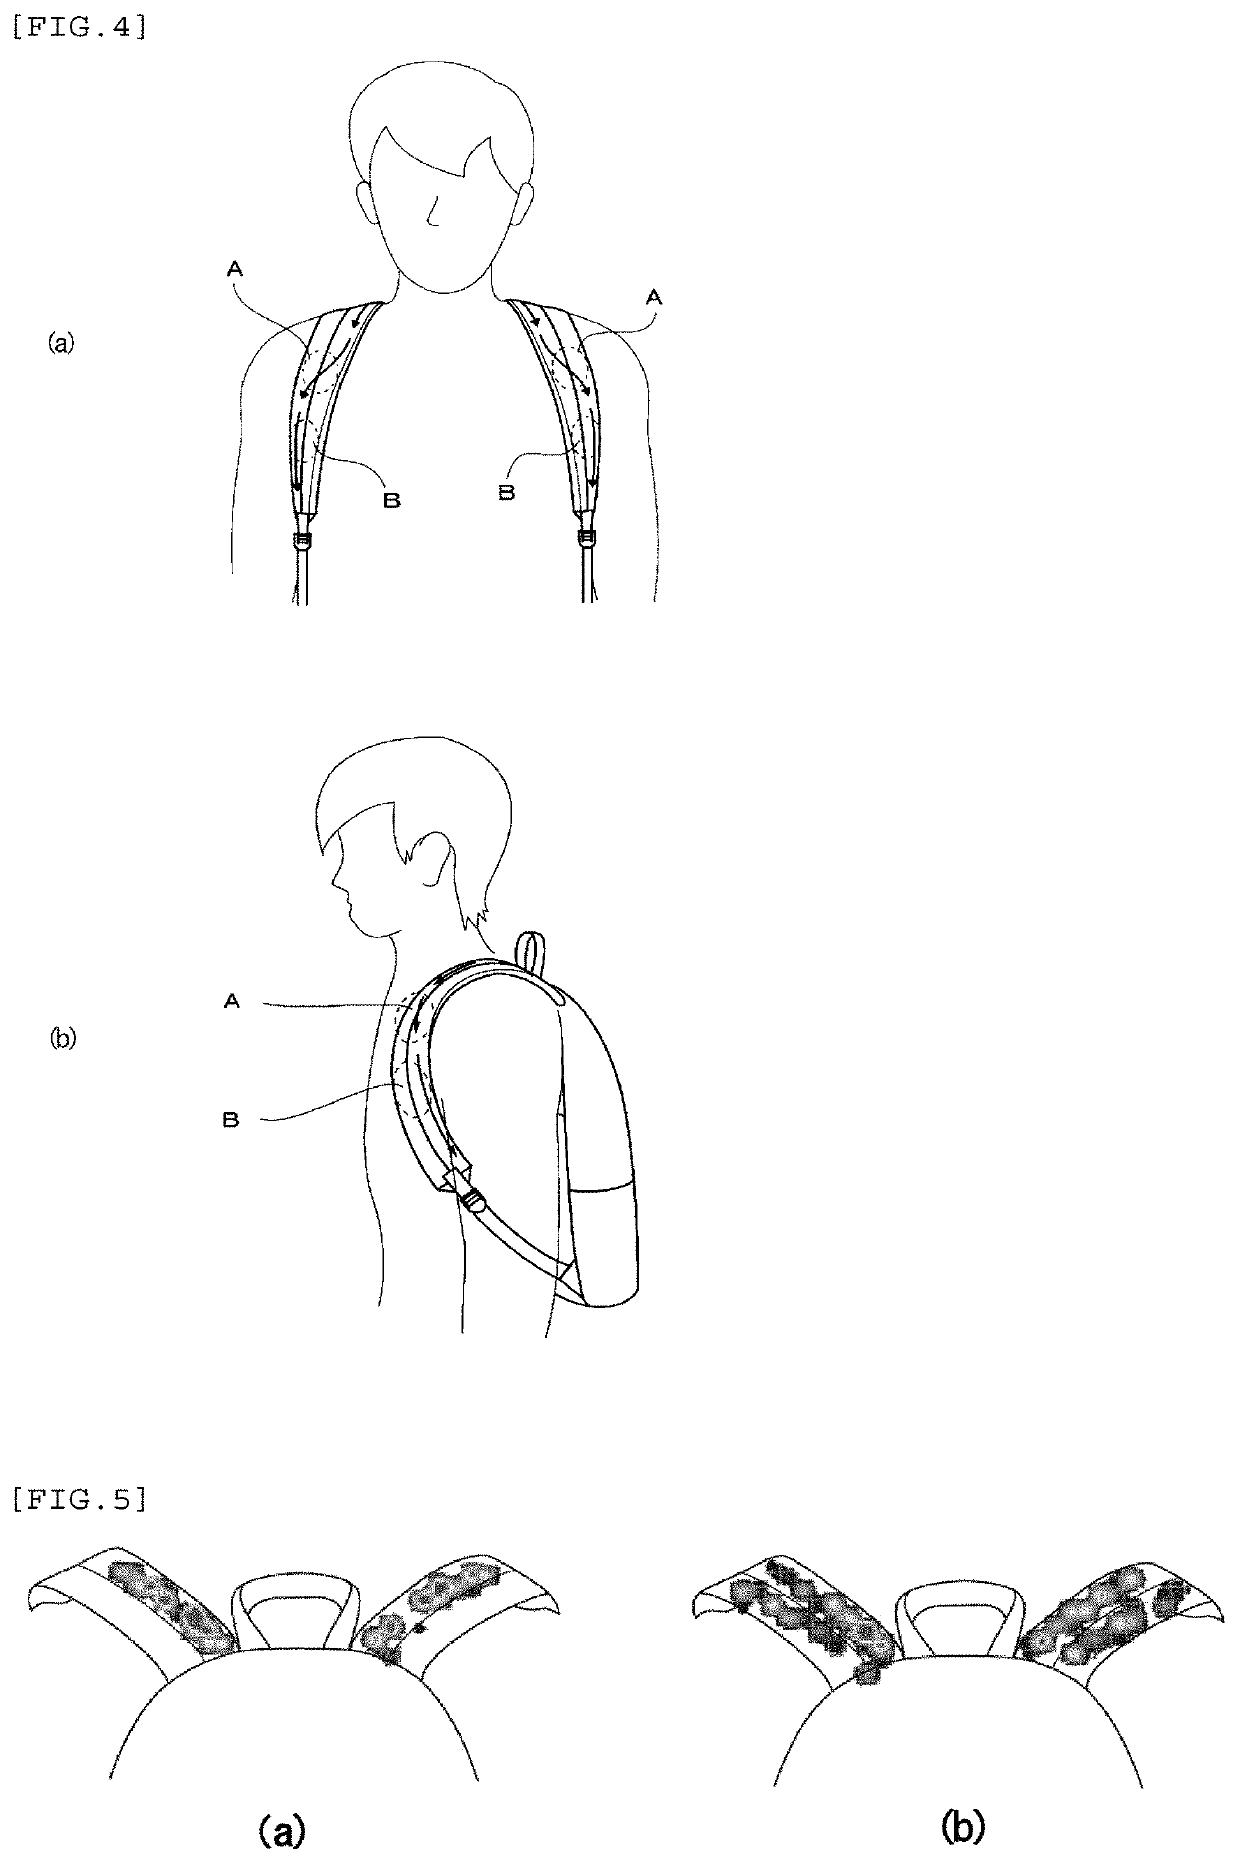 Shoulder straps for backpack and backpack provided with same